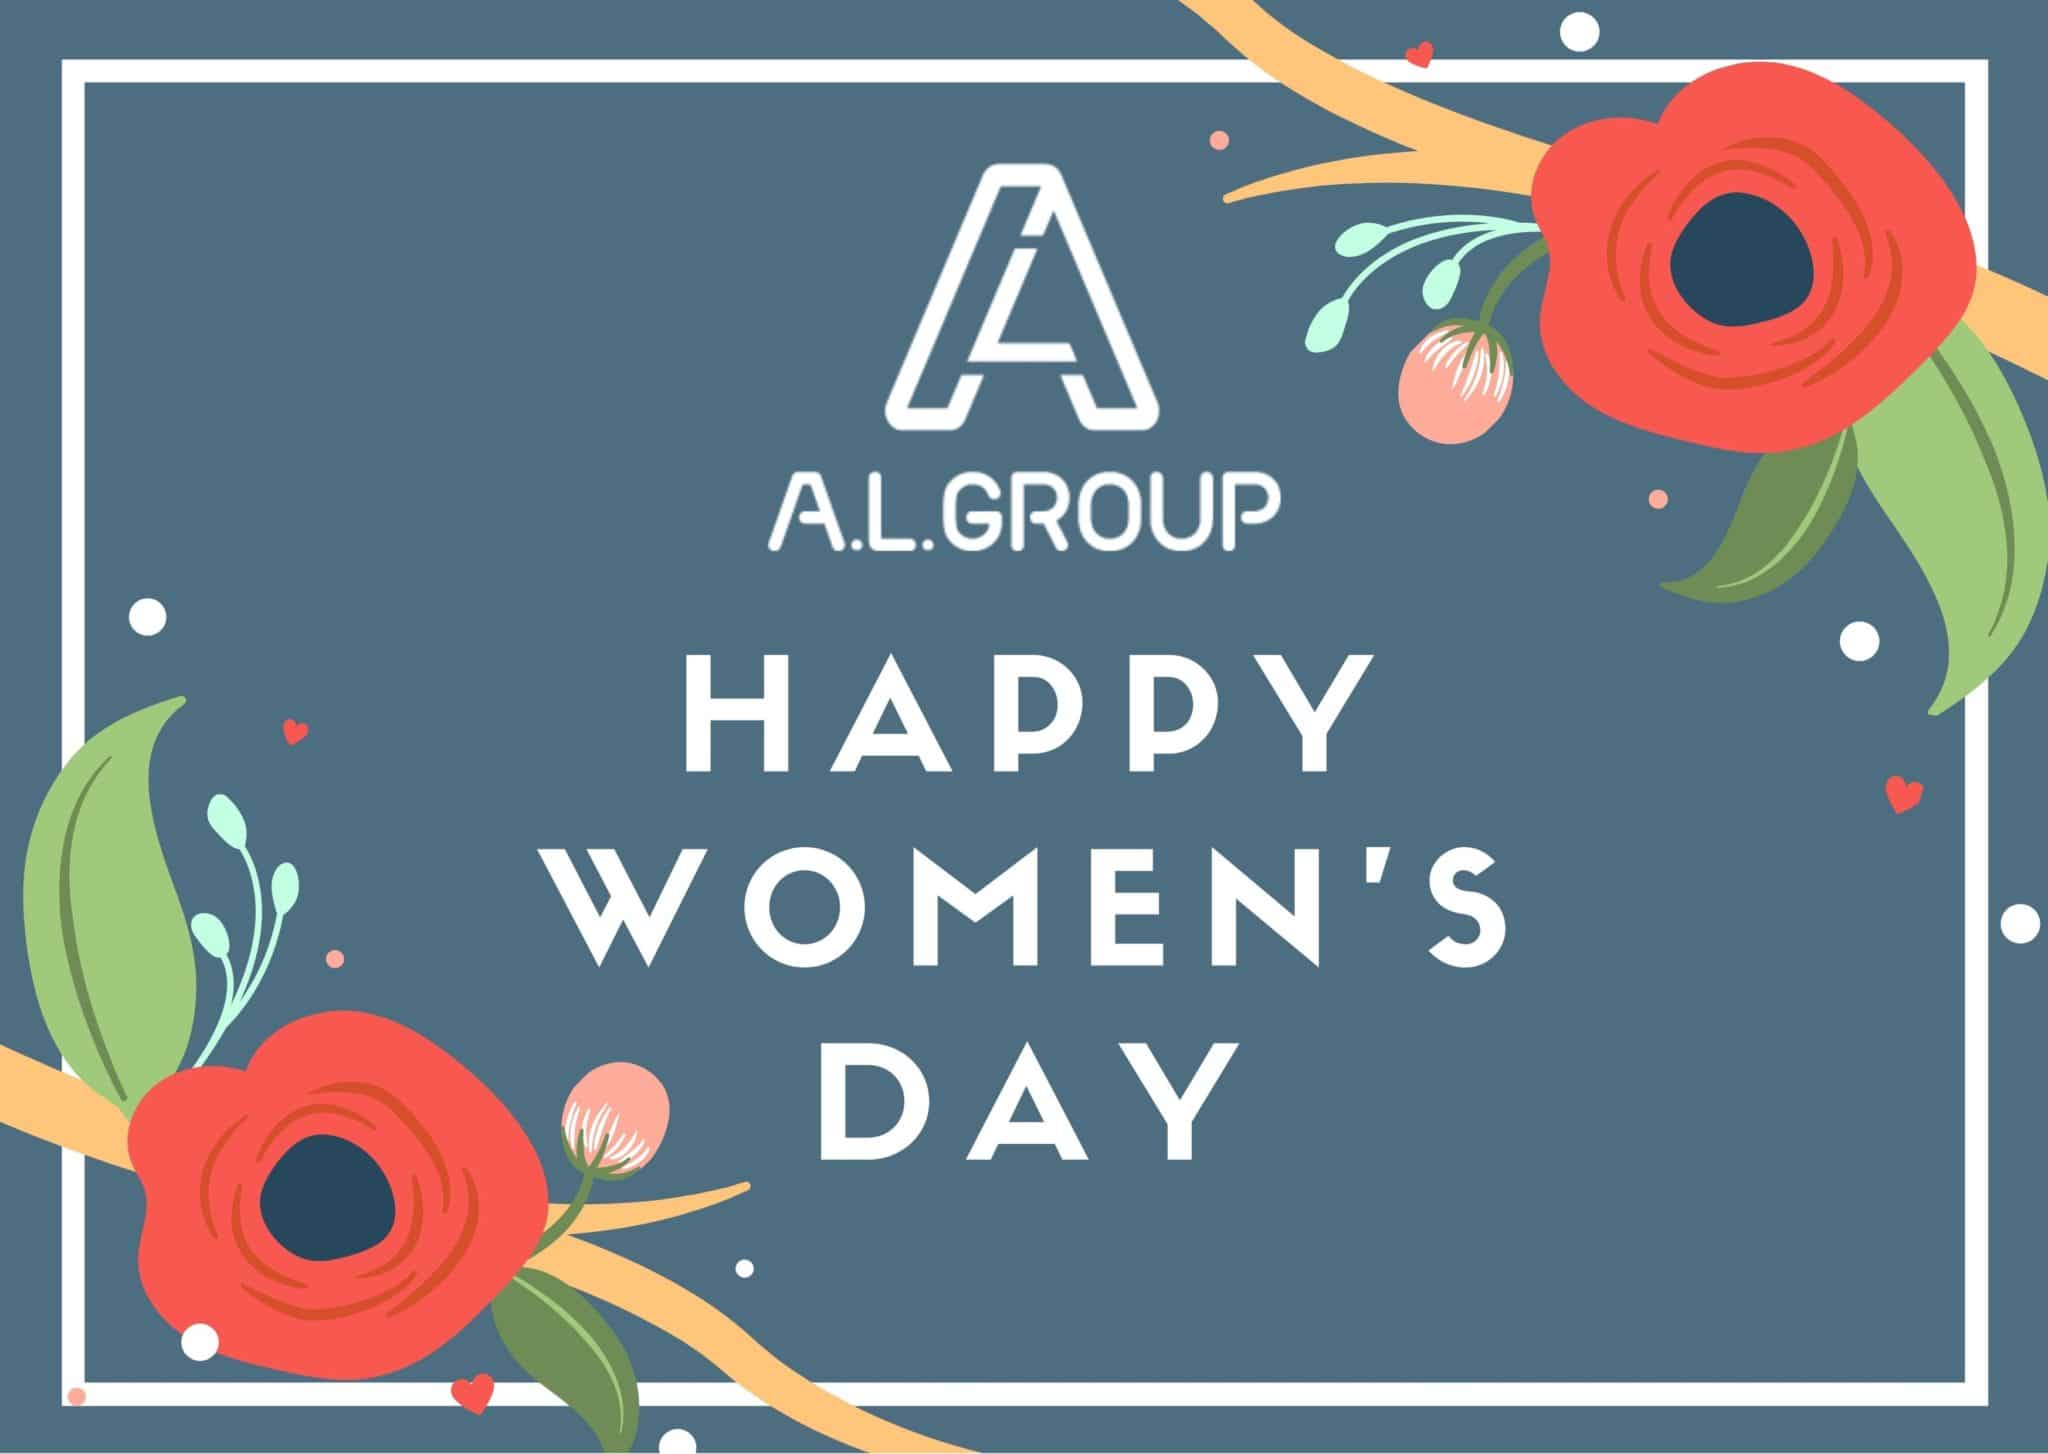 The Women of A.L. GROUP